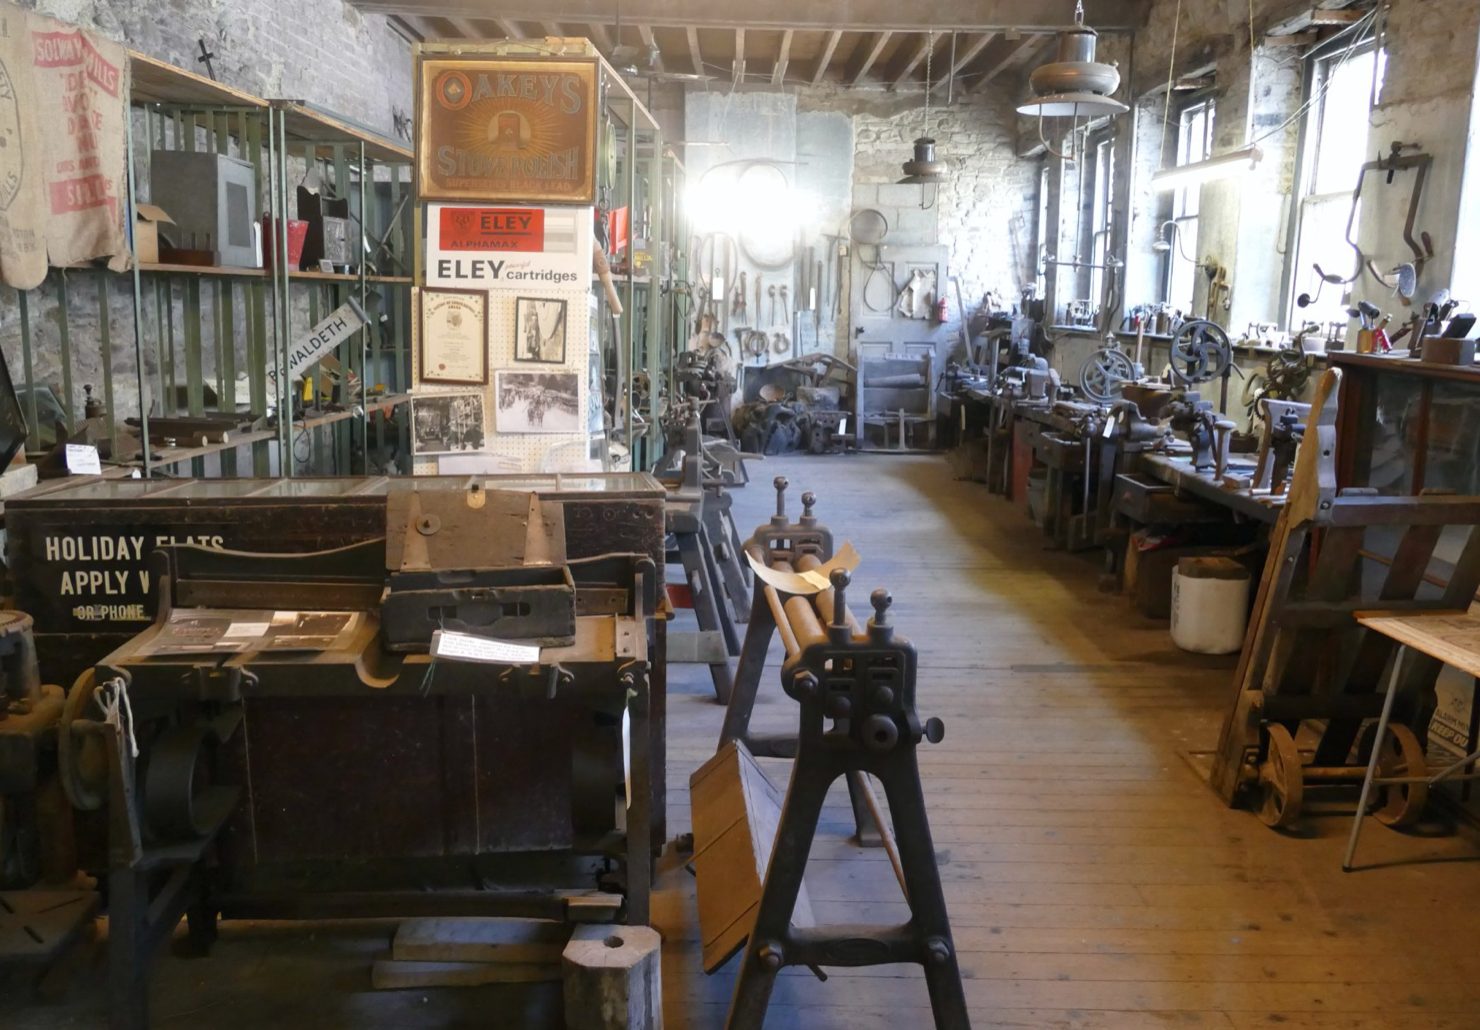 J.B. Banks and Sons Ltd ( Heritage Museum, Free Entry)